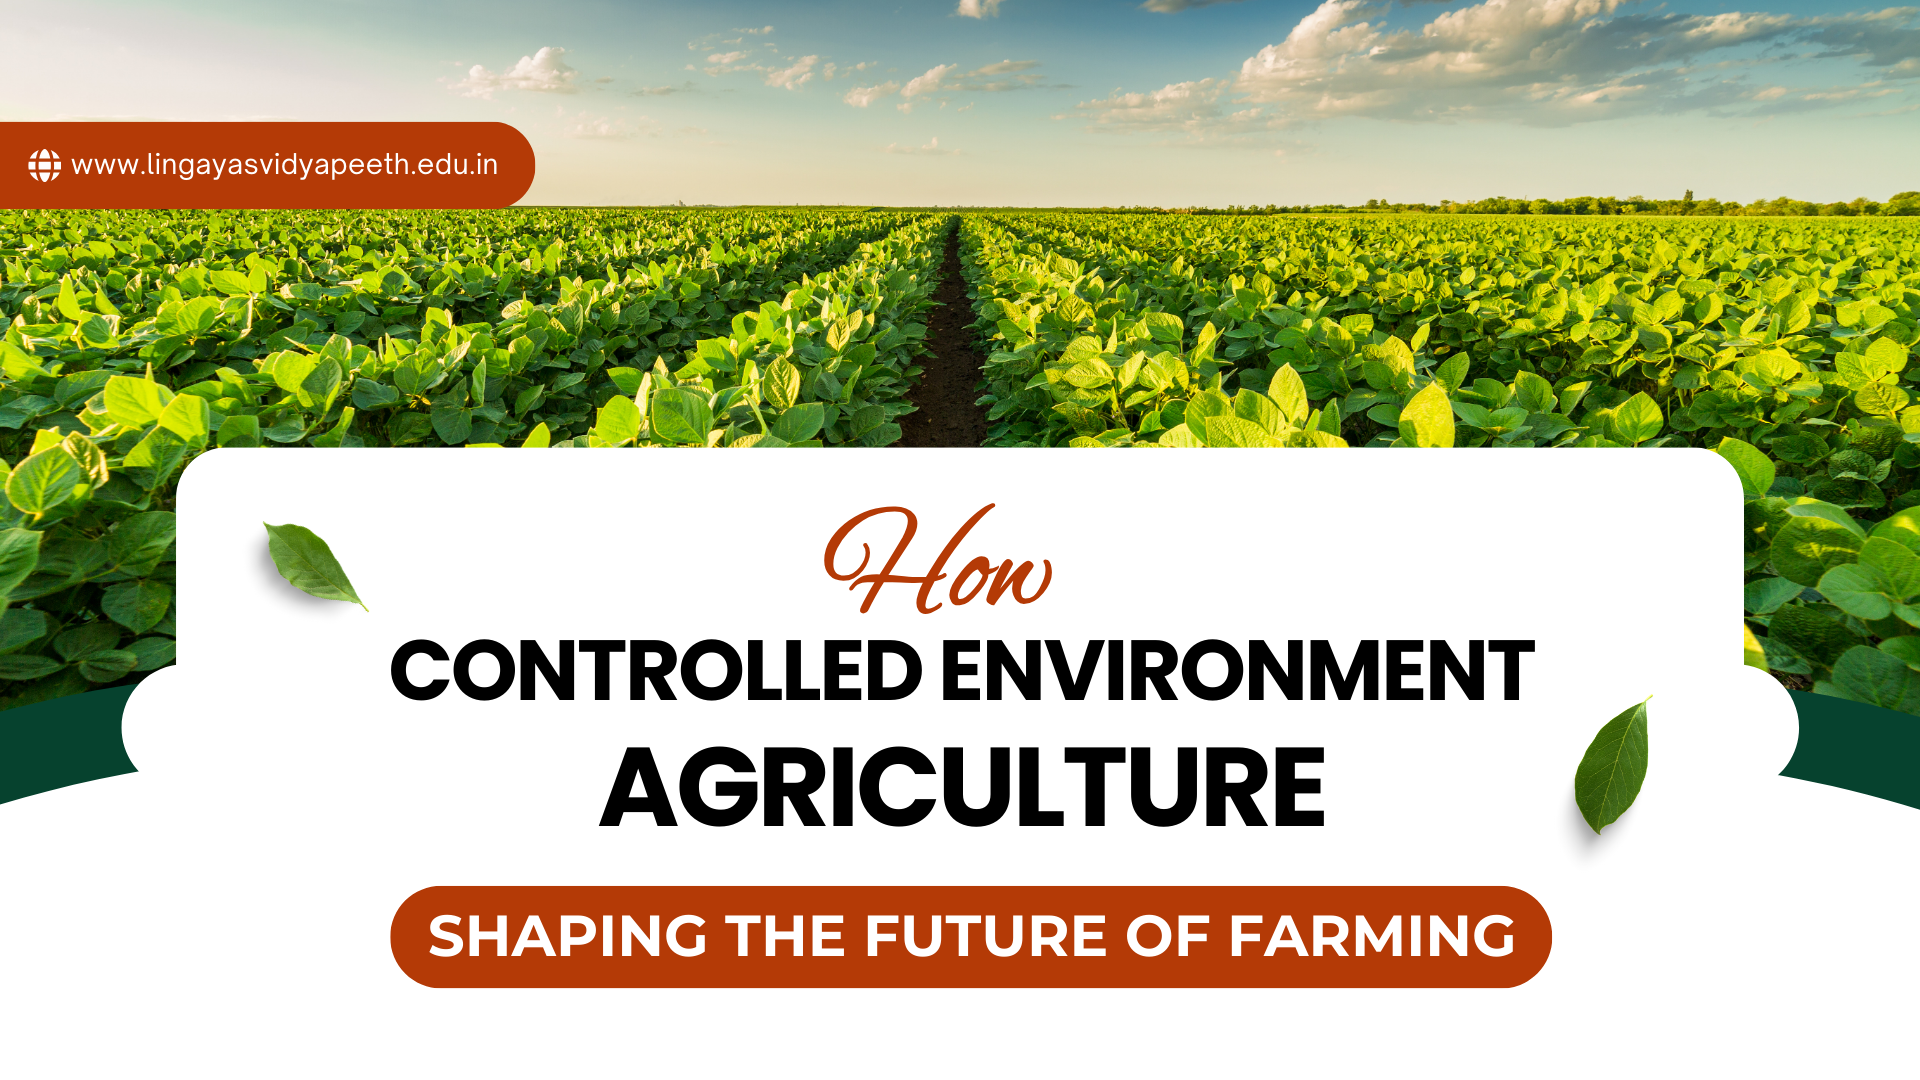 How is Controlled Environment Agriculture (CEA) Shaping the Future of Farming?